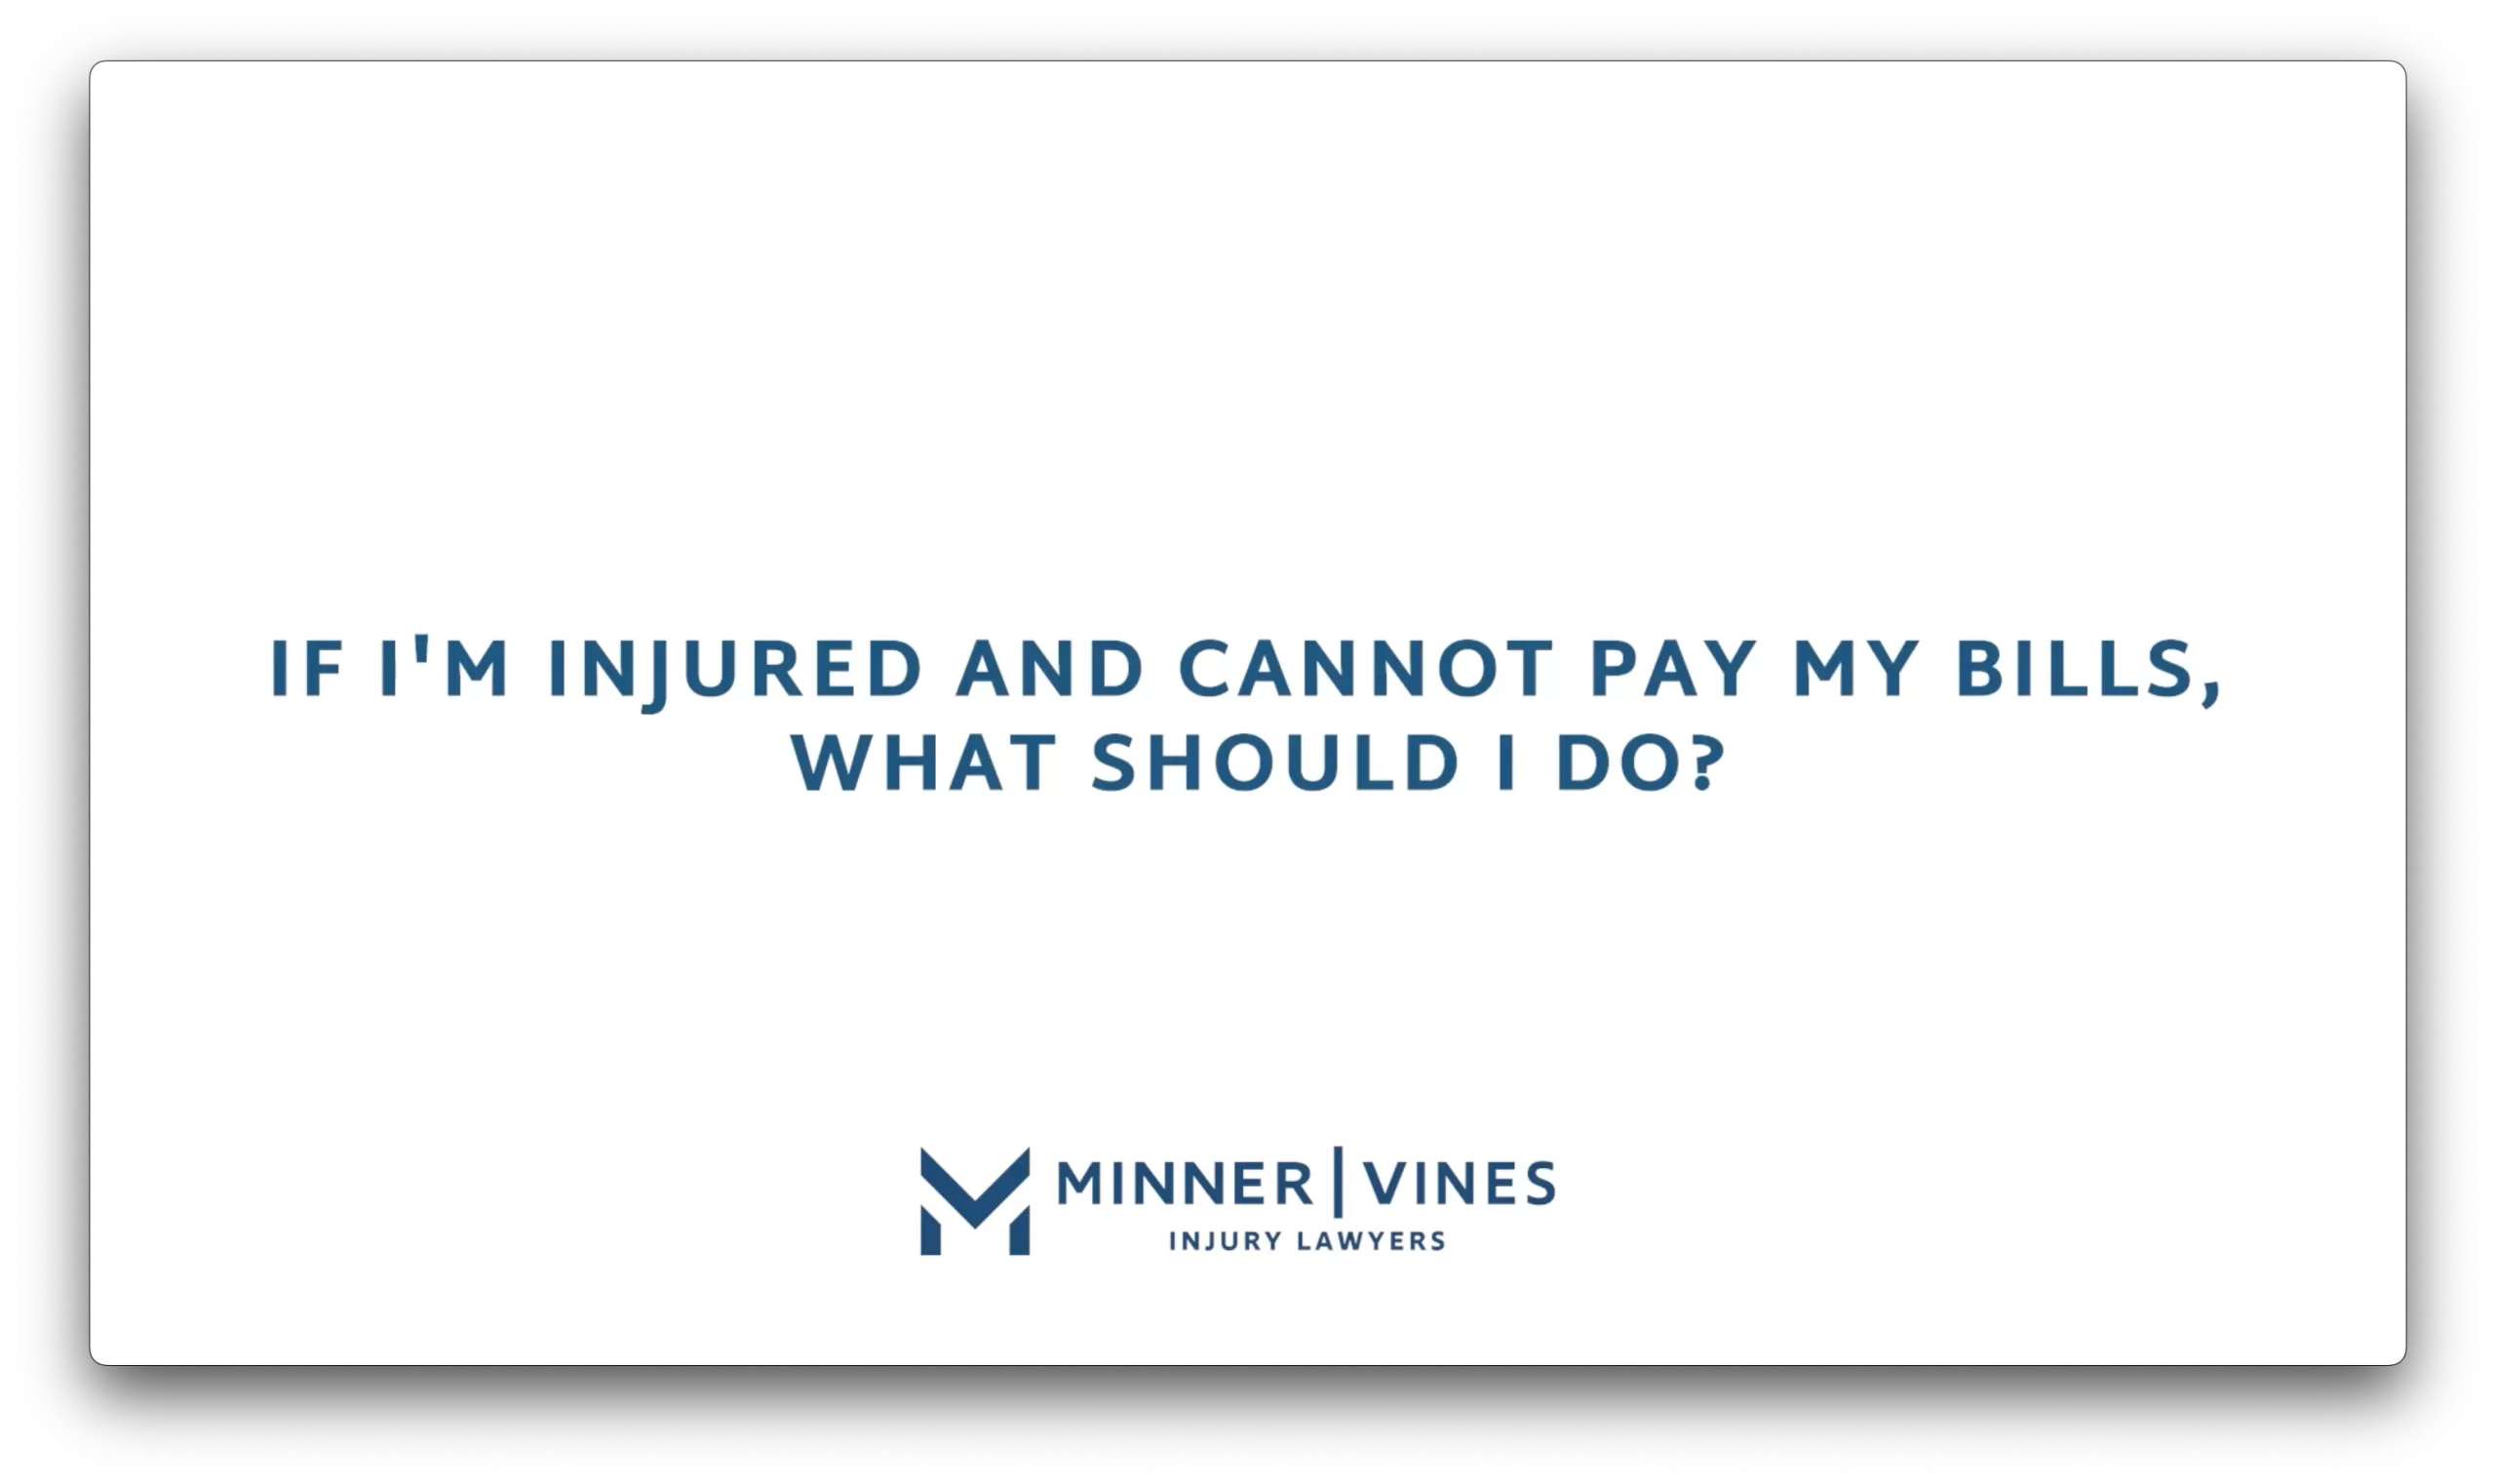 If I’m injured and cannot pay my bills, what should I do?